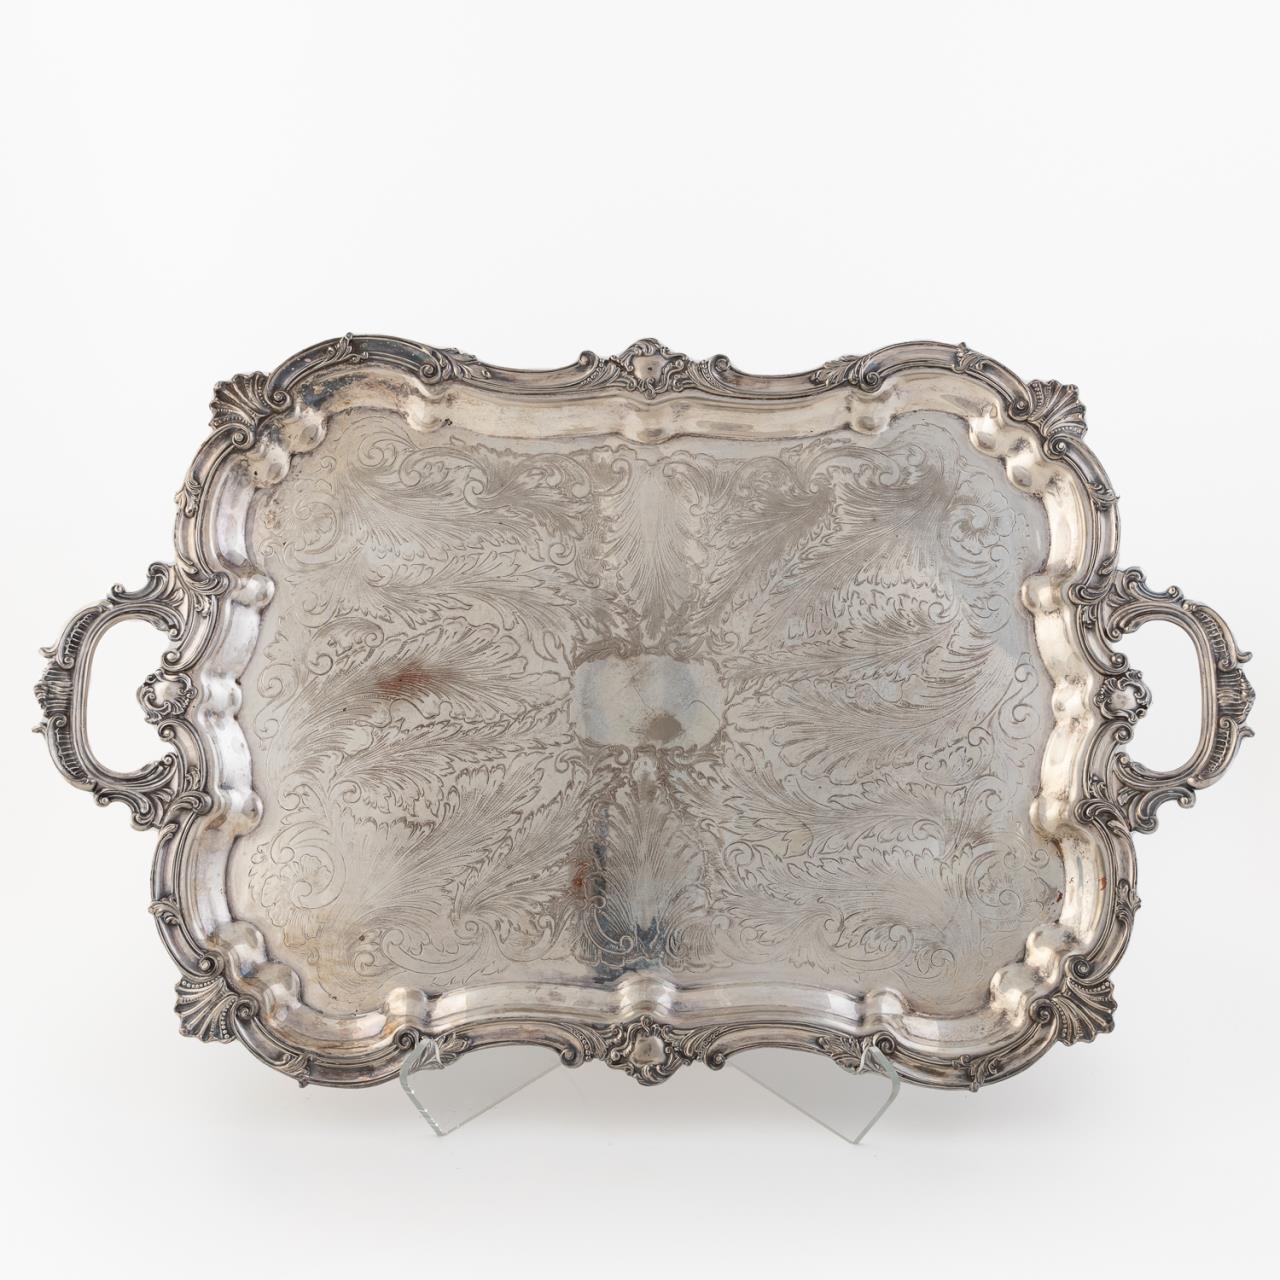 LARGE FOOTED SILVERPLATE RECTANGULAR